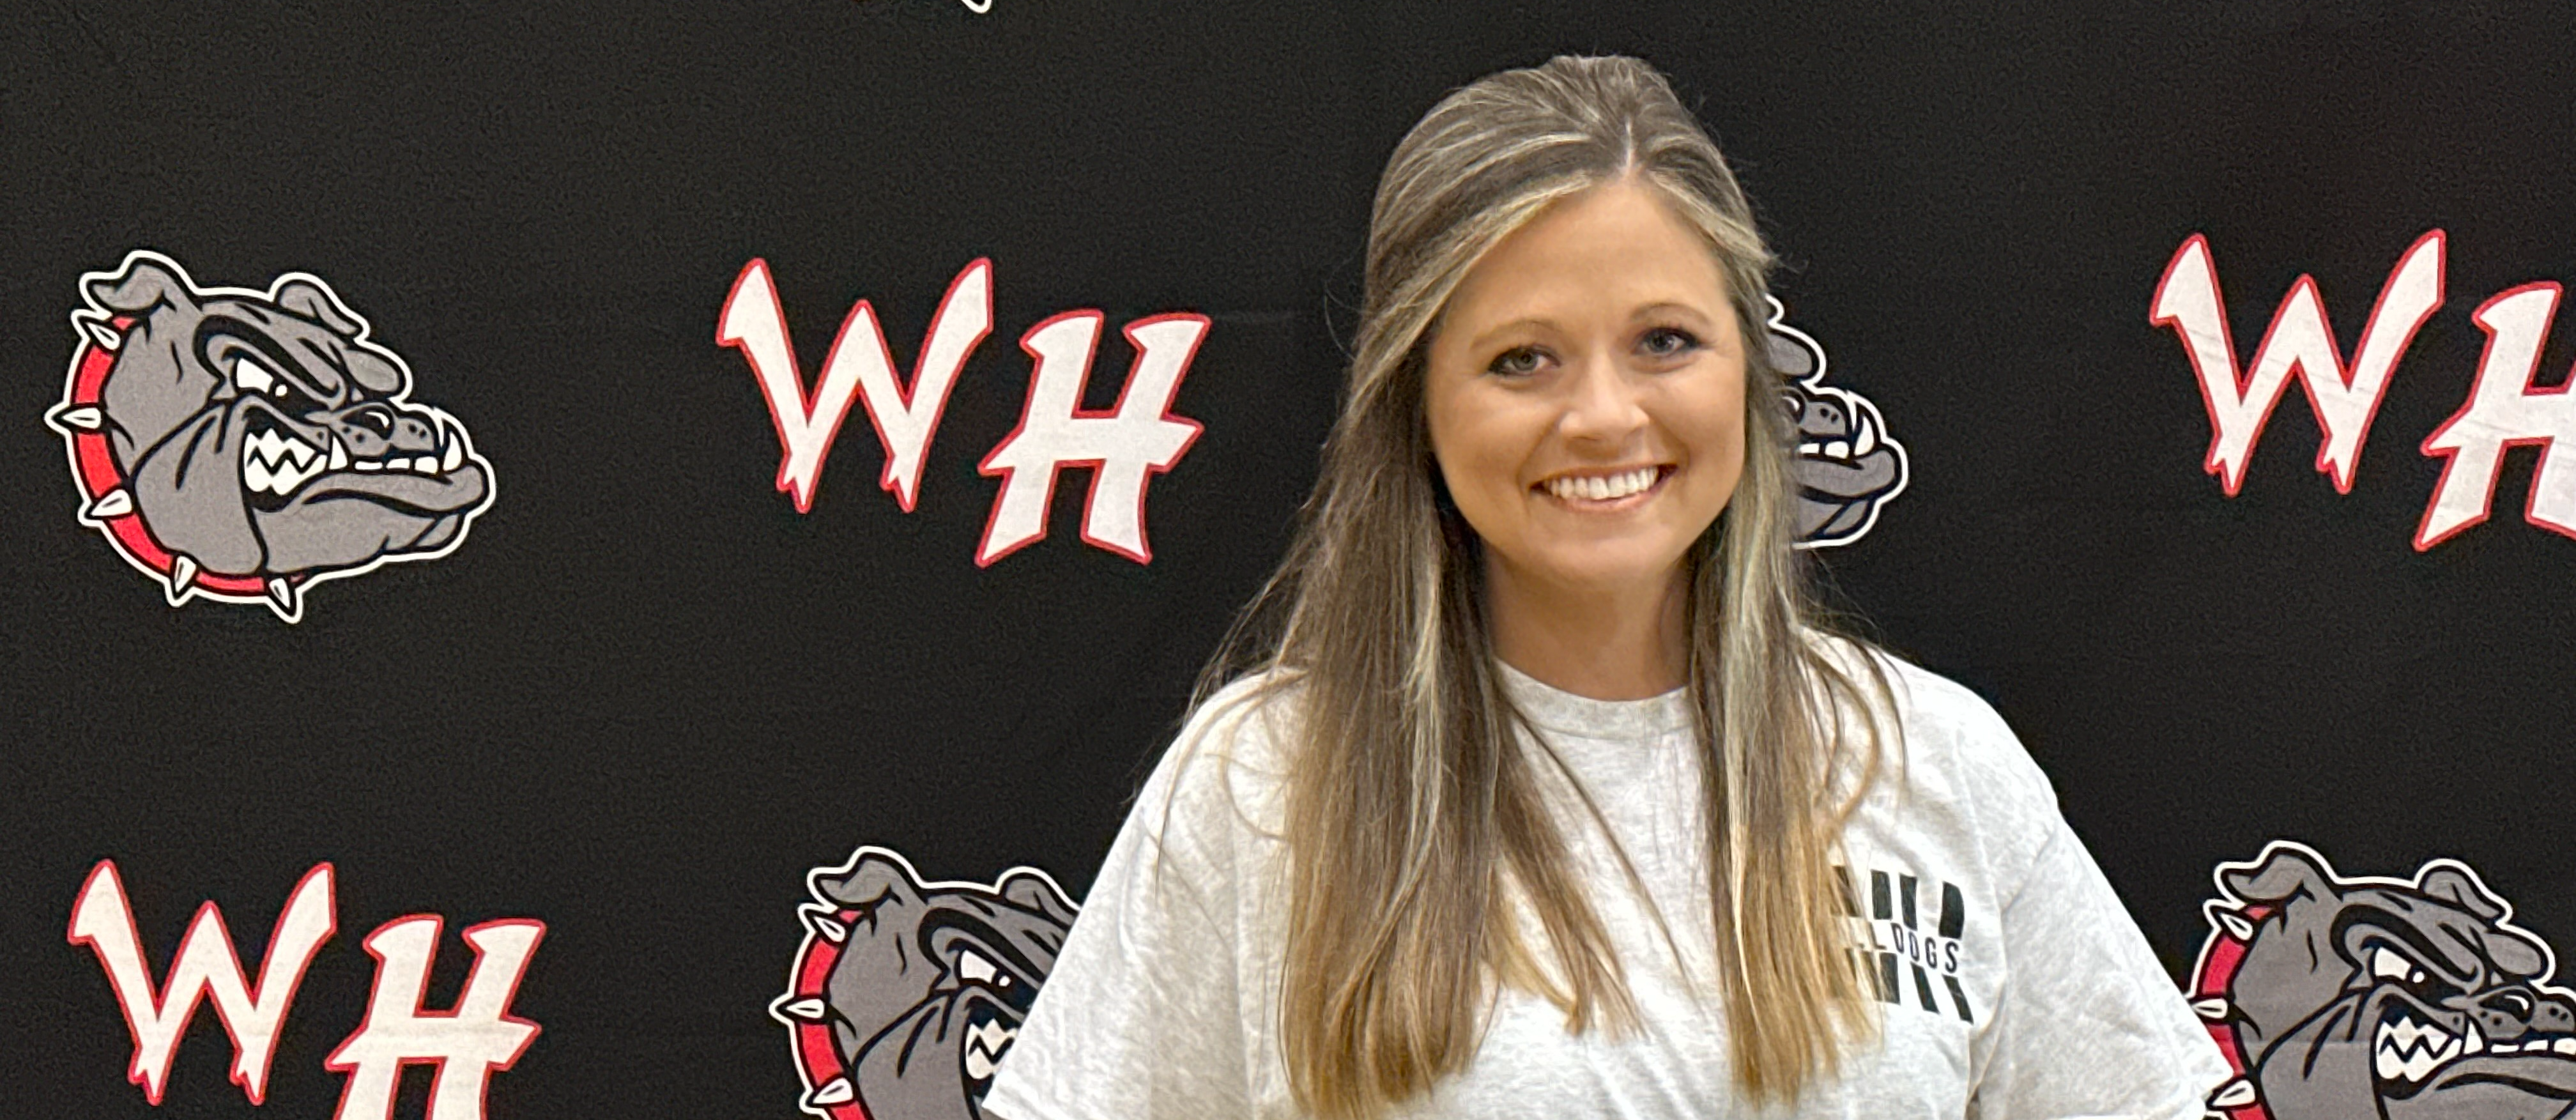 WHHS Teacher, Kaitlin Raines, was named the Secondary Teacher of the Year for the WHSD. Congratulations!